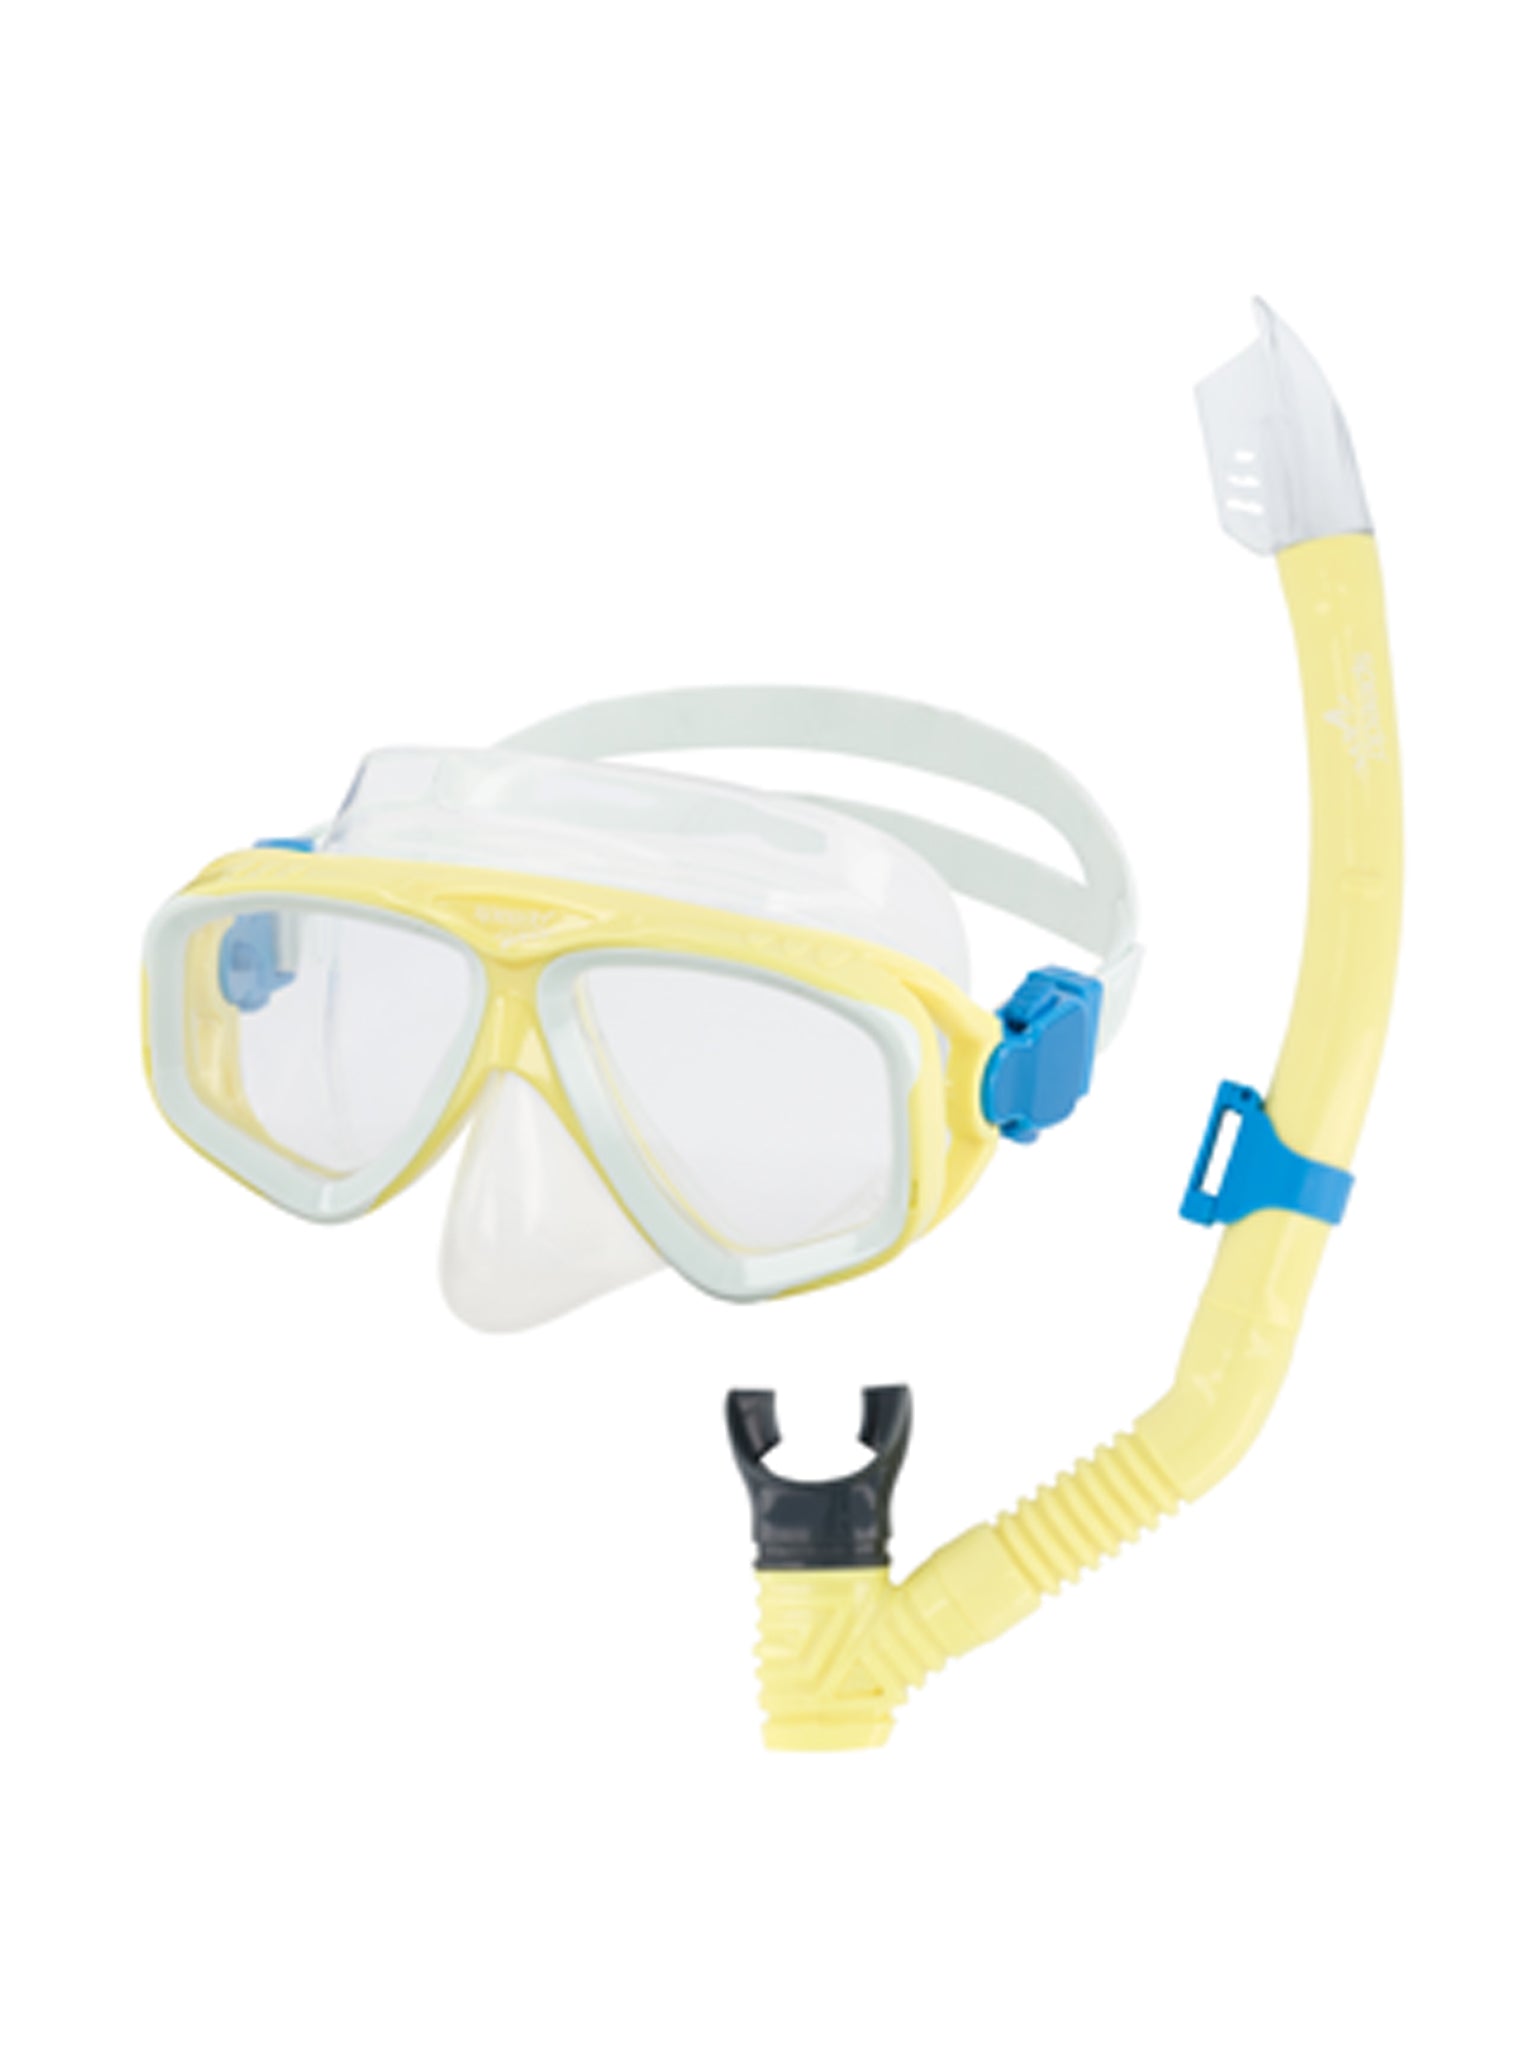 Adult Adventure Mask and Snorkel Set - Yellow